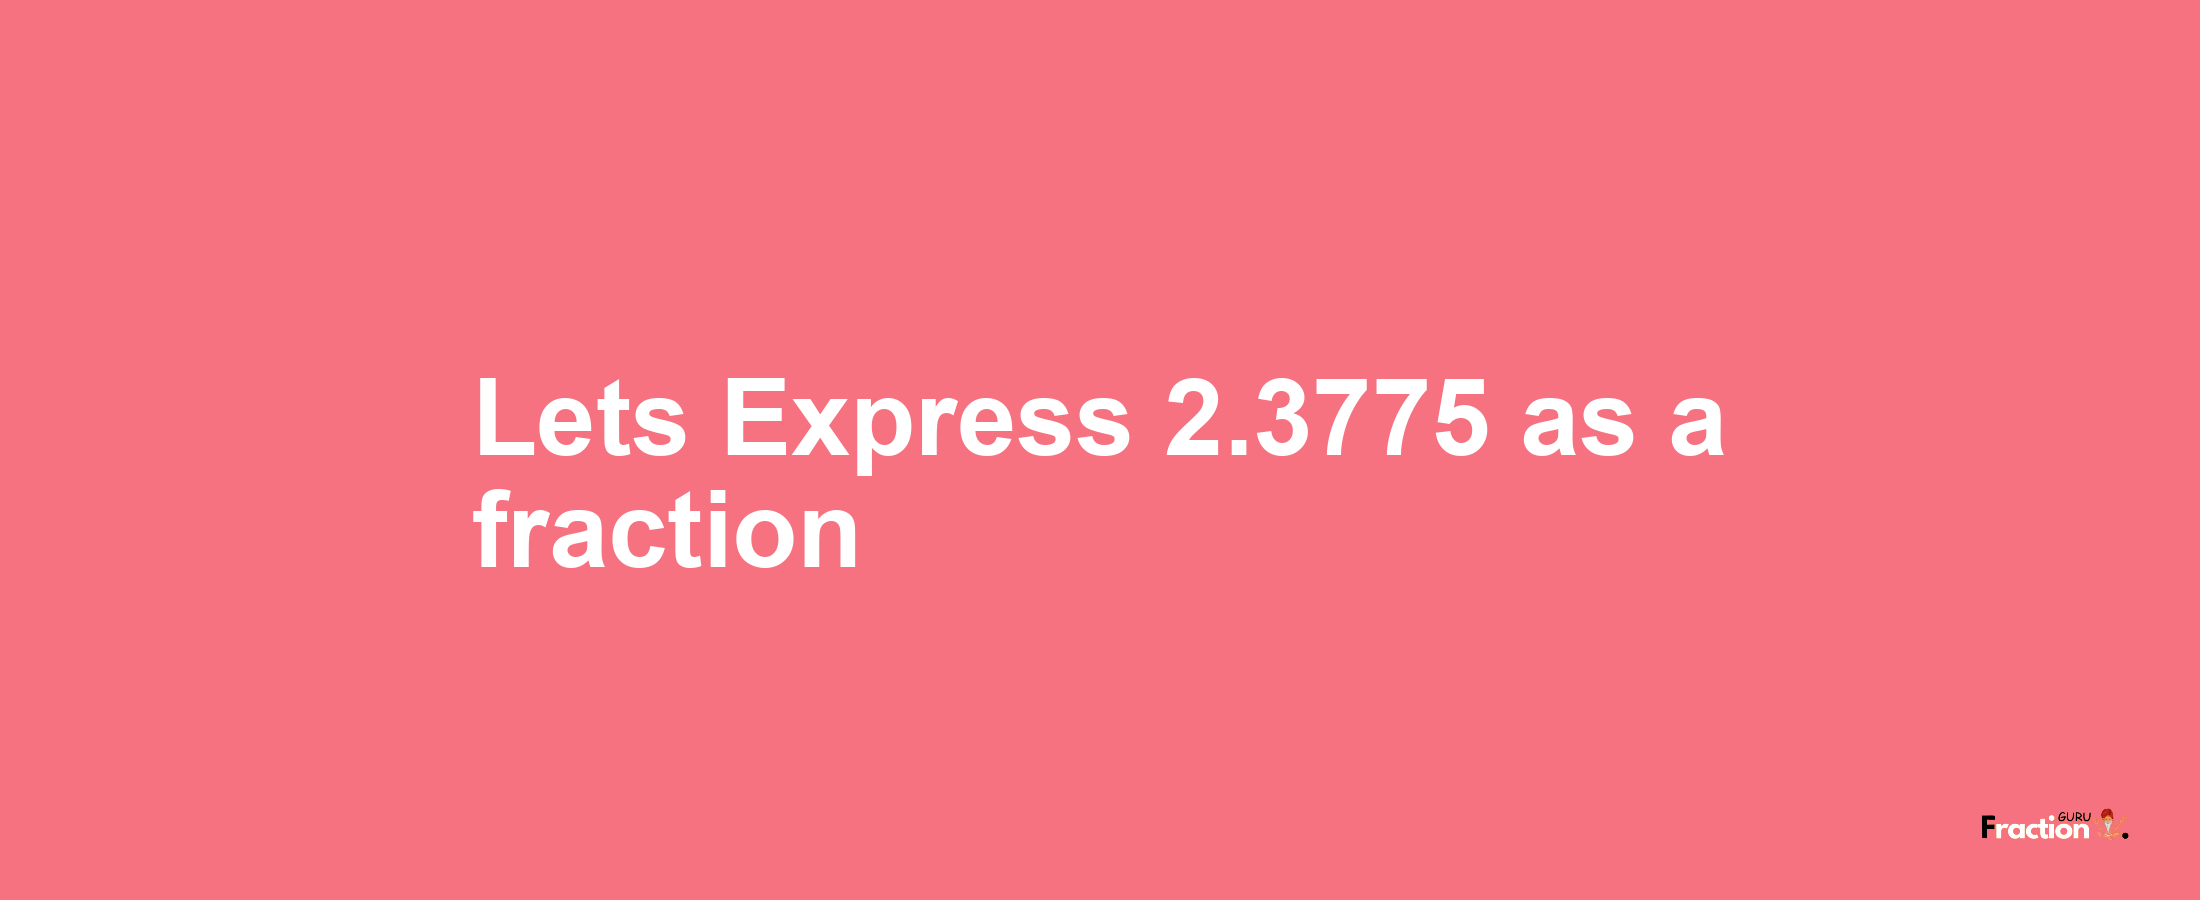 Lets Express 2.3775 as afraction